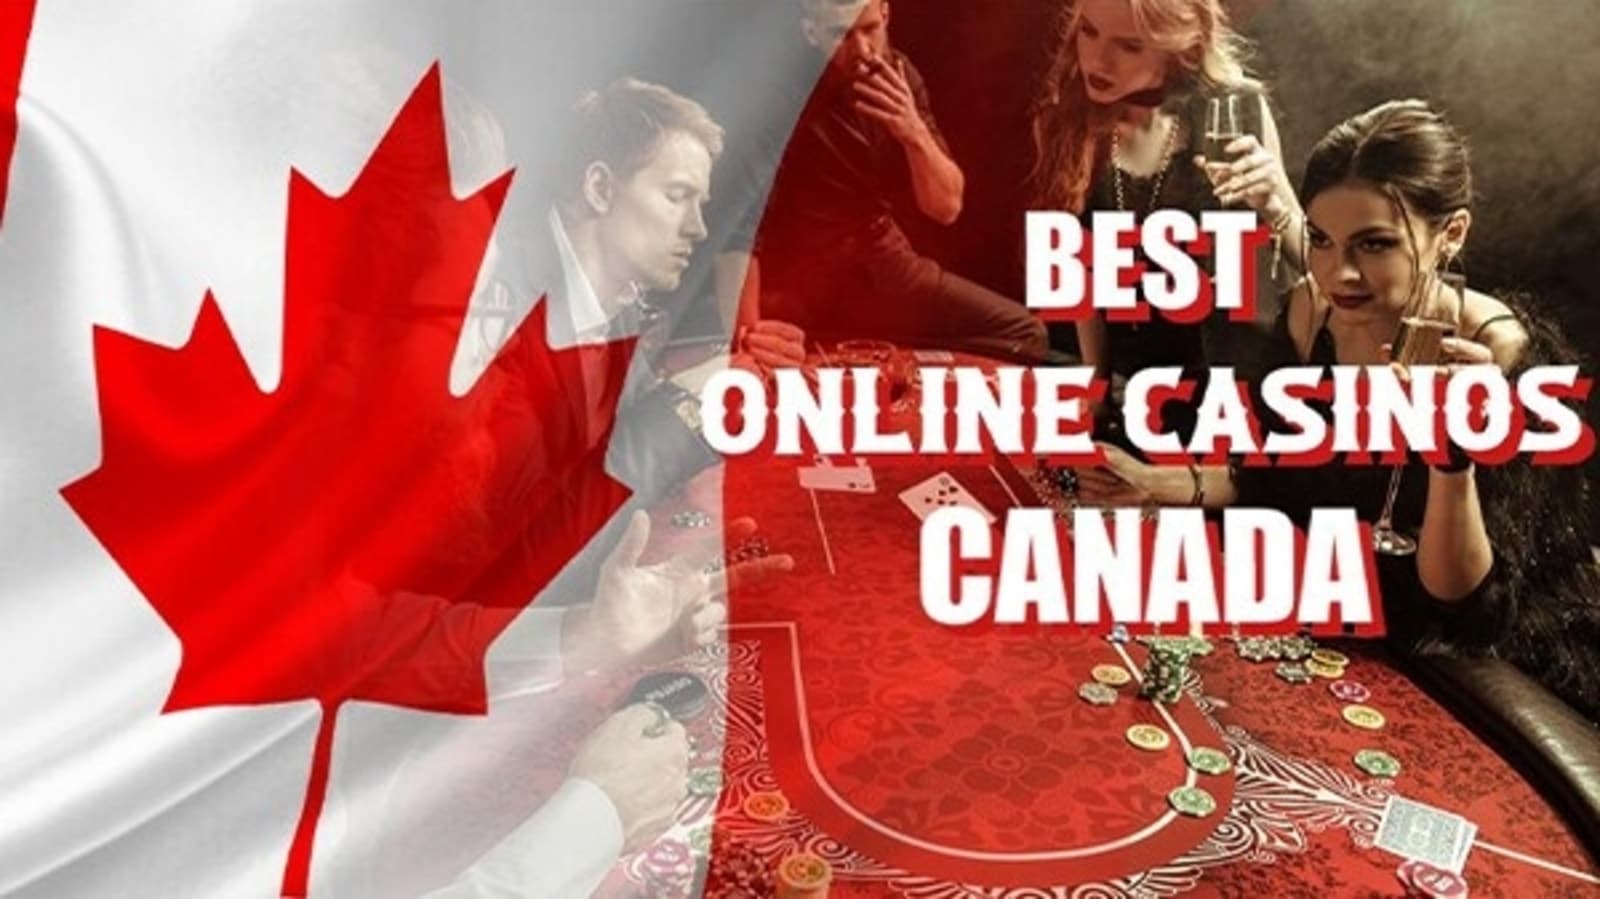 The Best 20 Examples Of online casinos in Canada